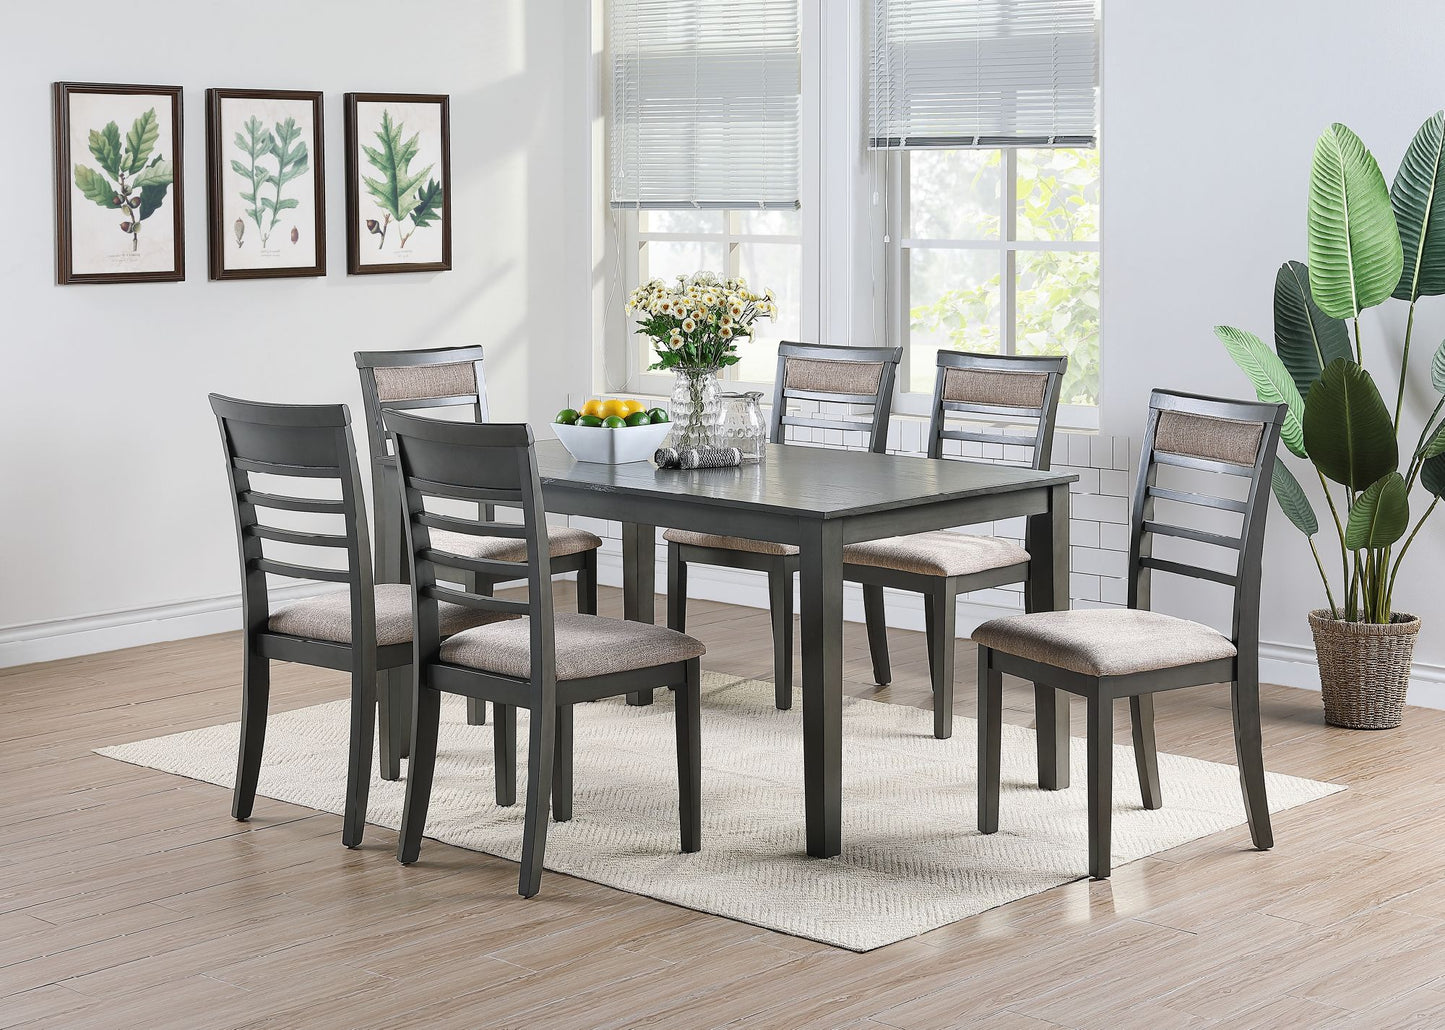 Antique Grey Finish Dinette 7pc Set Kitchen Breakfast Dining Table w wooden Top Cushion Seats 6x Chairs Dining room Furniture Home Decor by Design